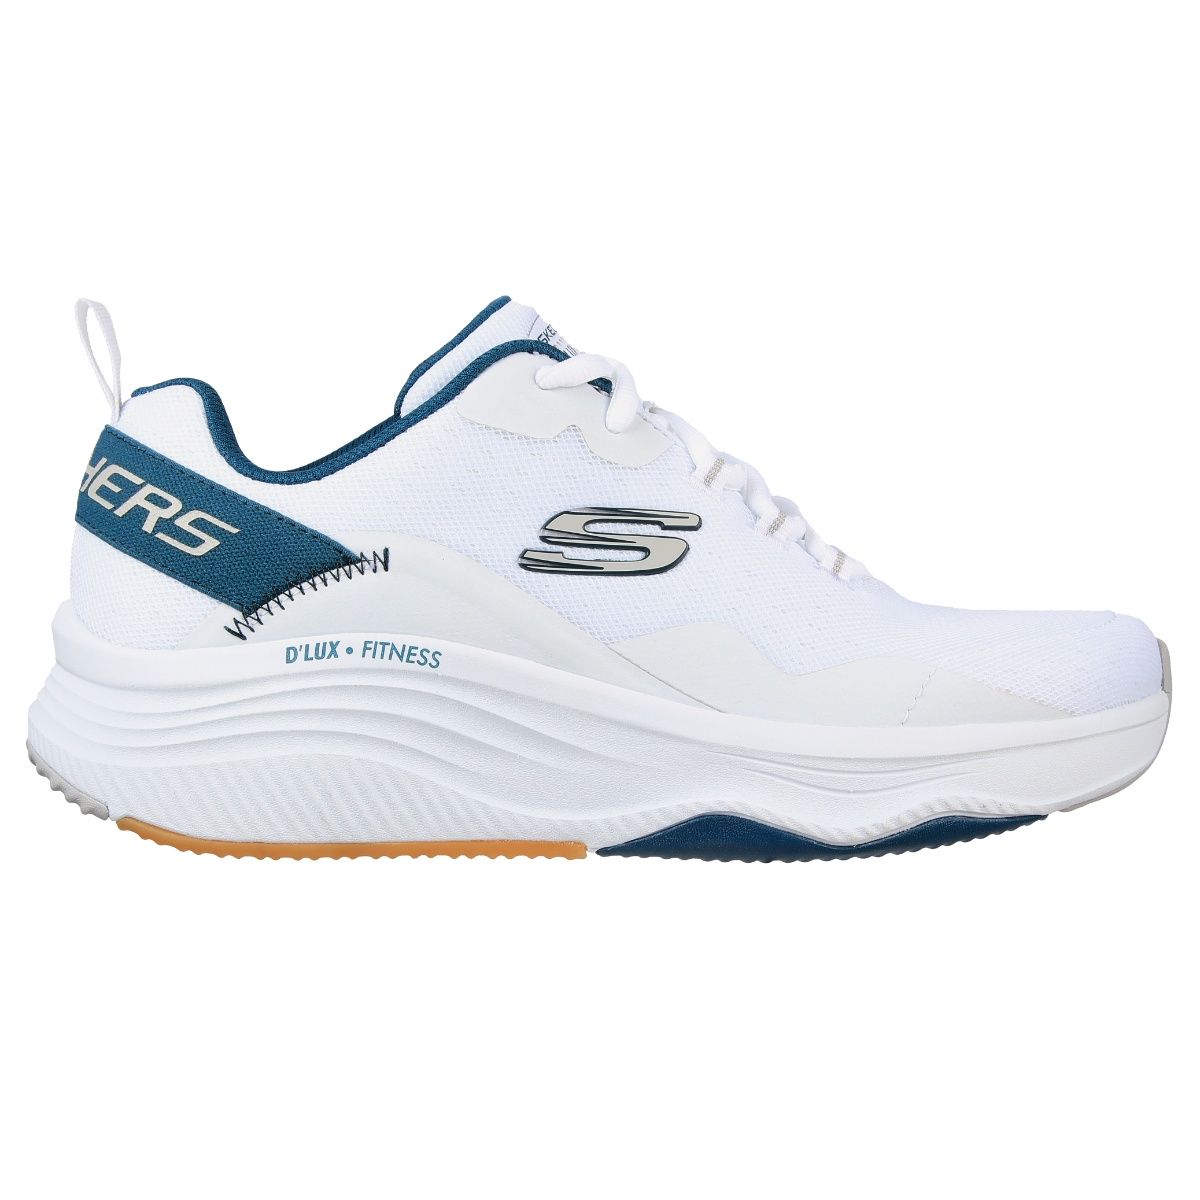 Buy Comfortable Sports Shoes Pick Any 1 + Free Sports Watch, Aluminium  Wallet, Sunglasses (SW68) Online at Best Price in India on Naaptol.com